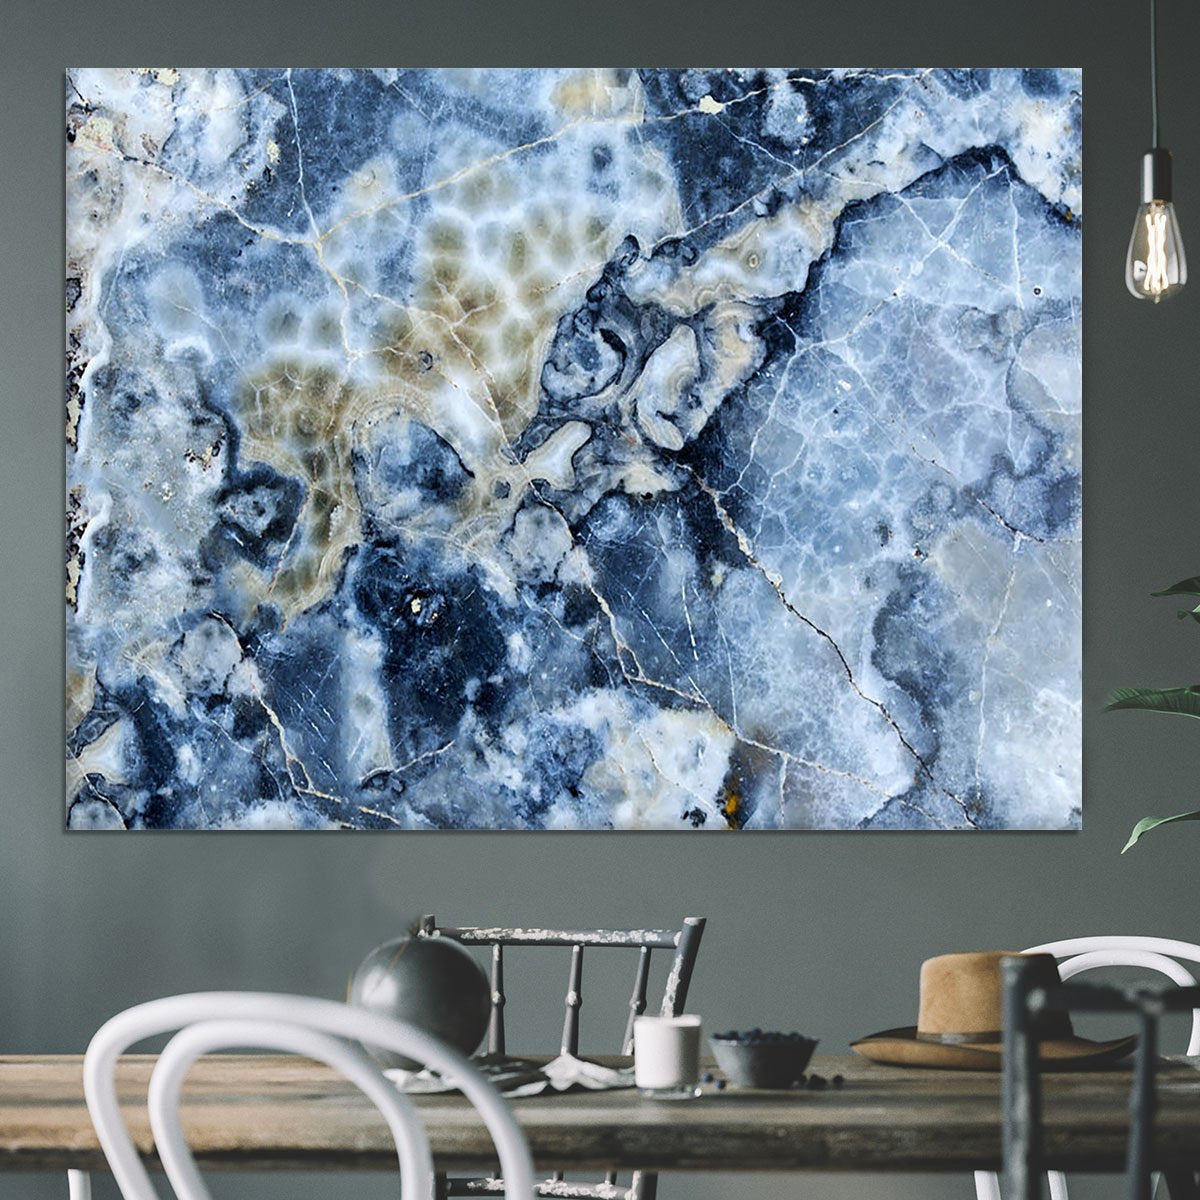 Navy Cracked and Speckled Marble Canvas Print or Poster